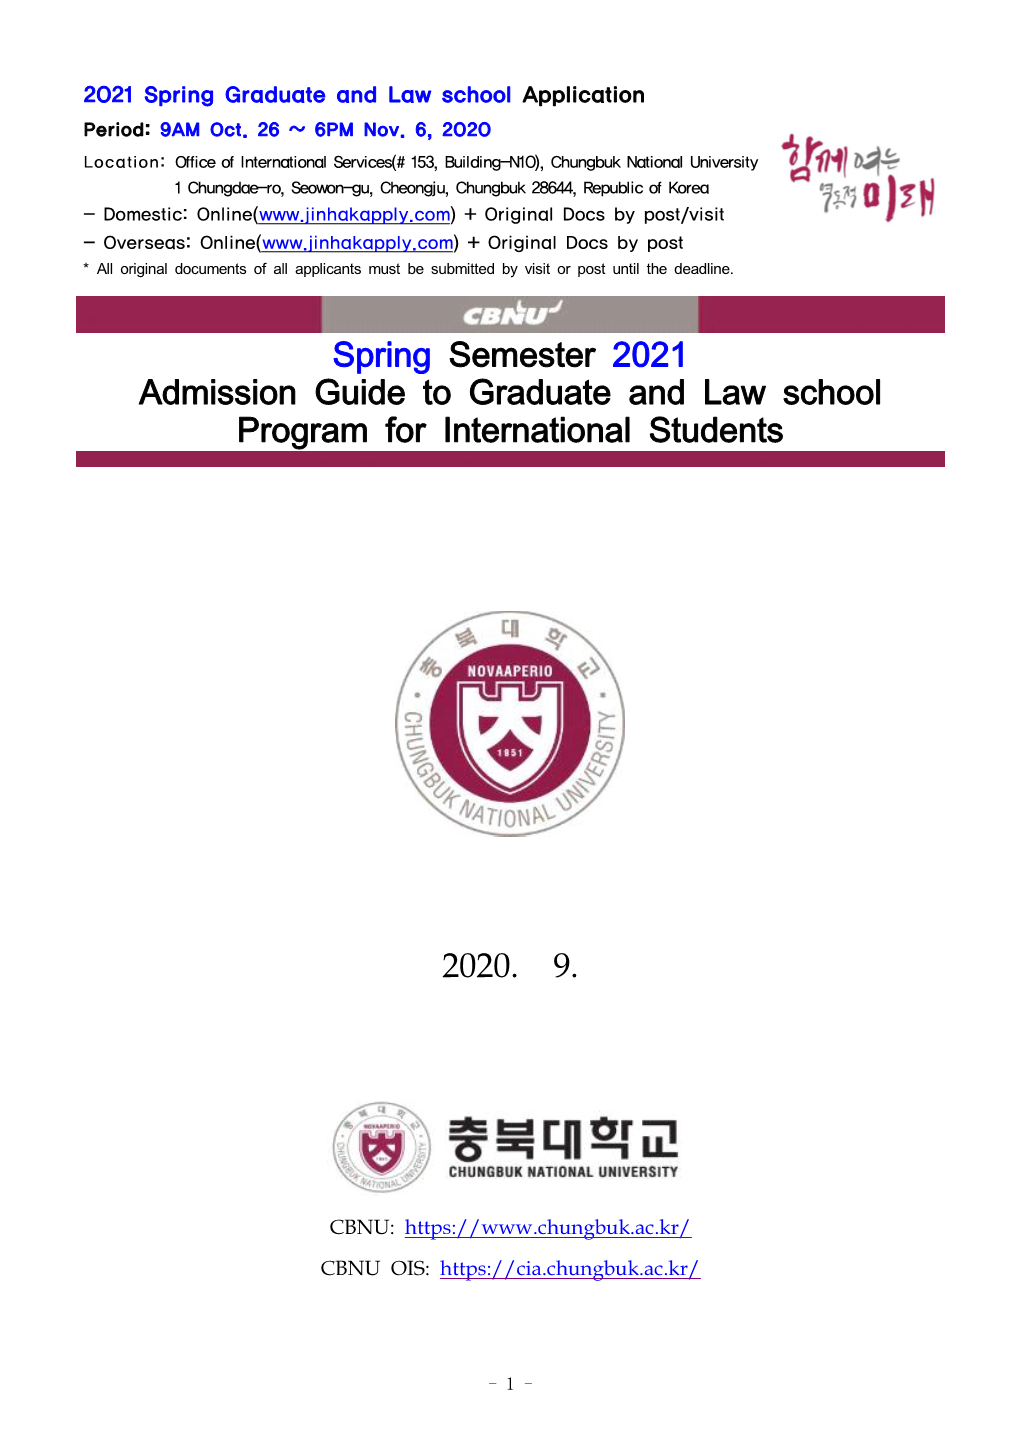 Spring Semester 2021 Admission Guide to Graduate and Law School Program for International Students